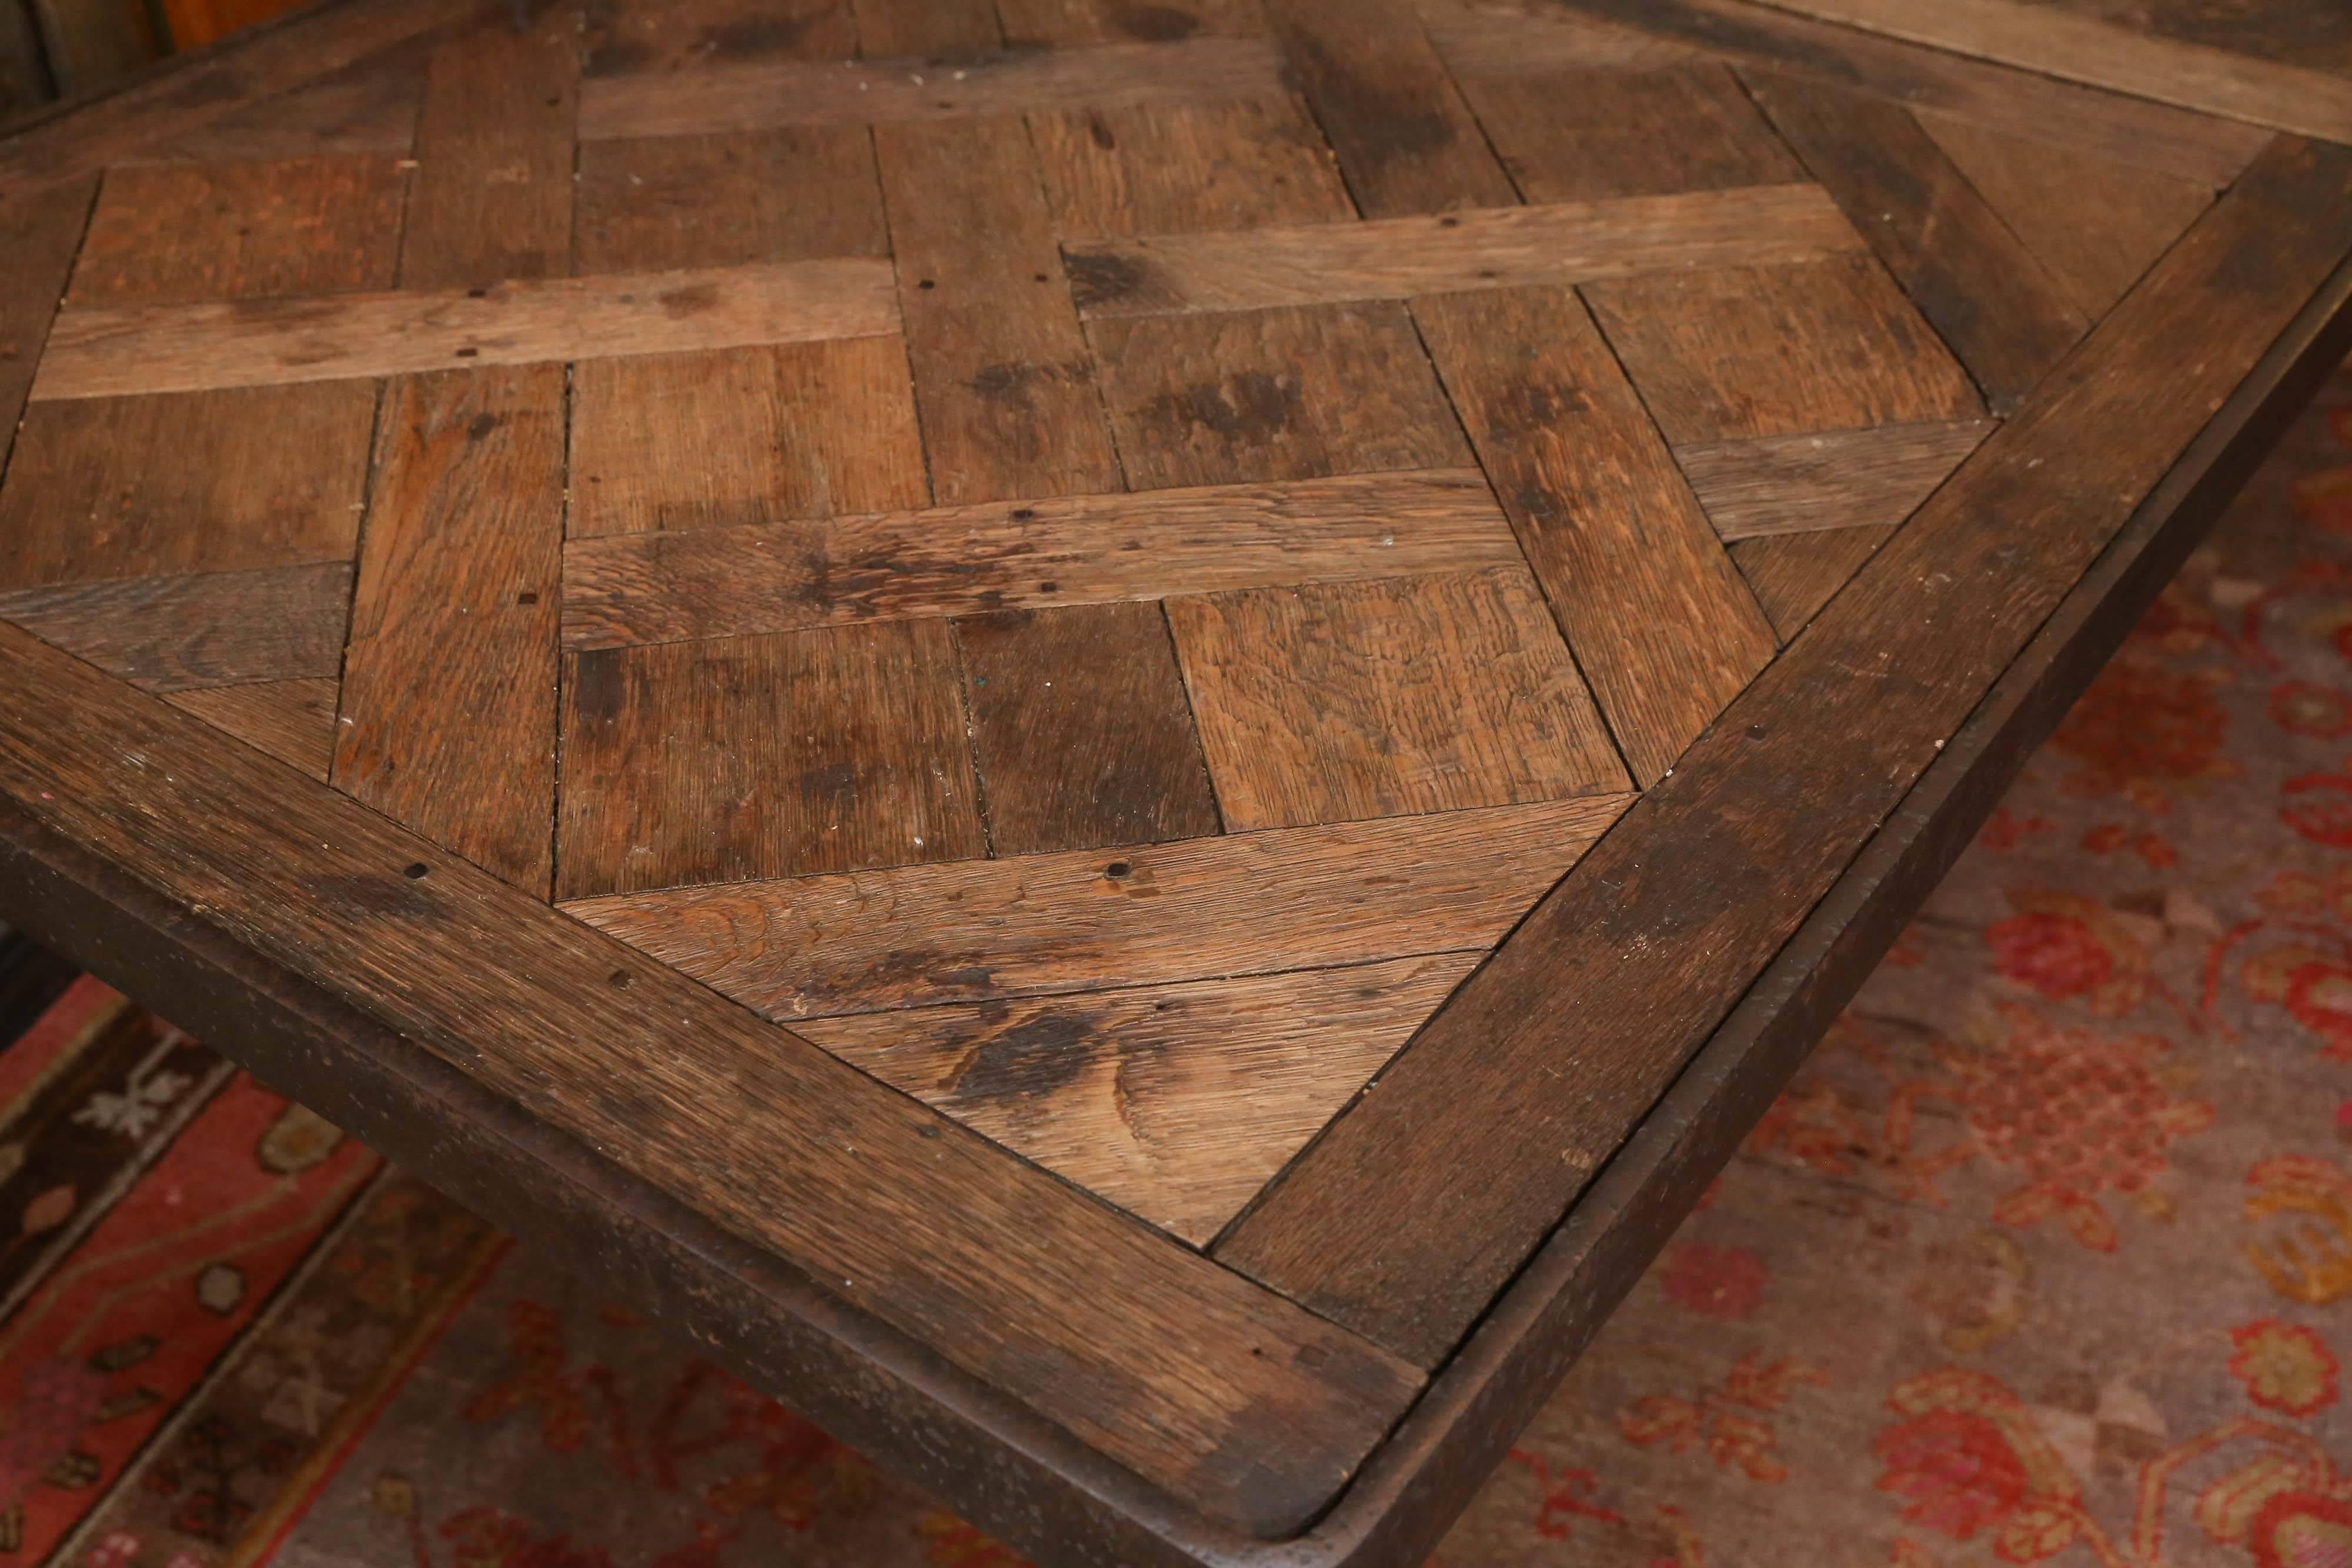 Des Versailes oak parquet top in set in a wrought metal frame and sits on
two 1940s metal bases with bun feet and connected by a center brace.

Very Rustic looking and quite unique.

